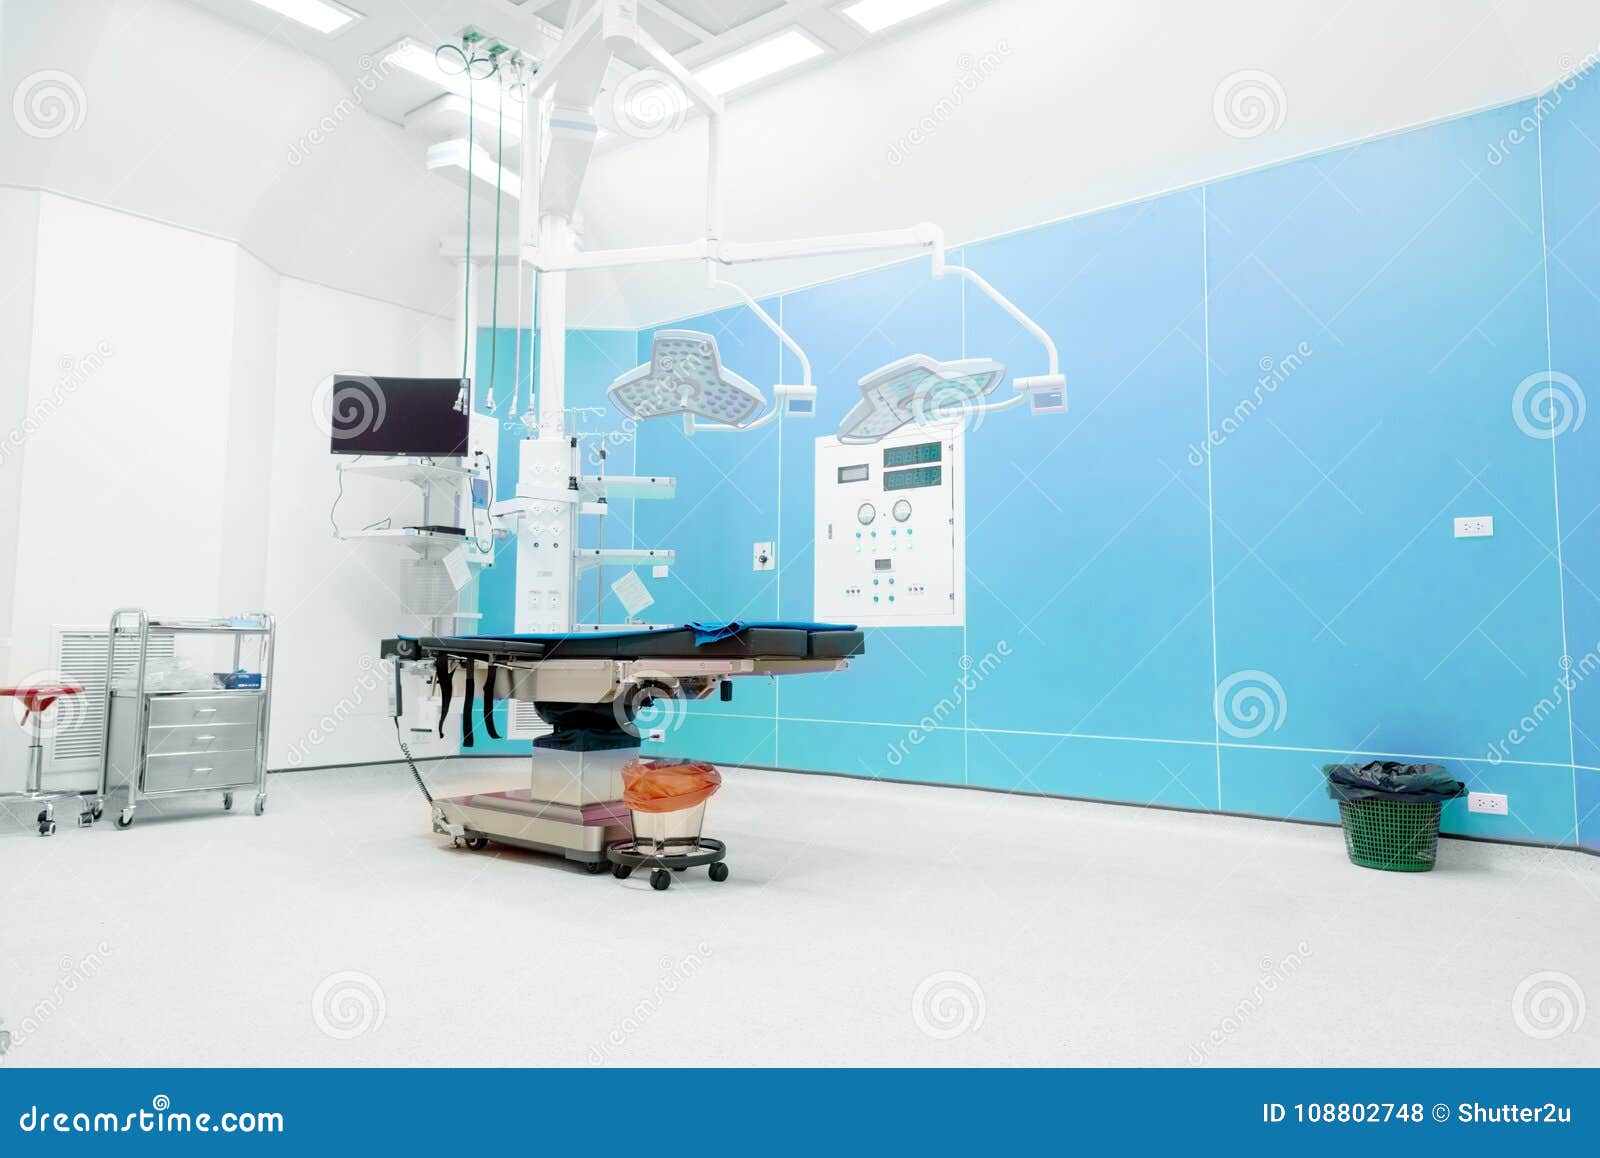 operation room in hospital. emergency and health care concept. r